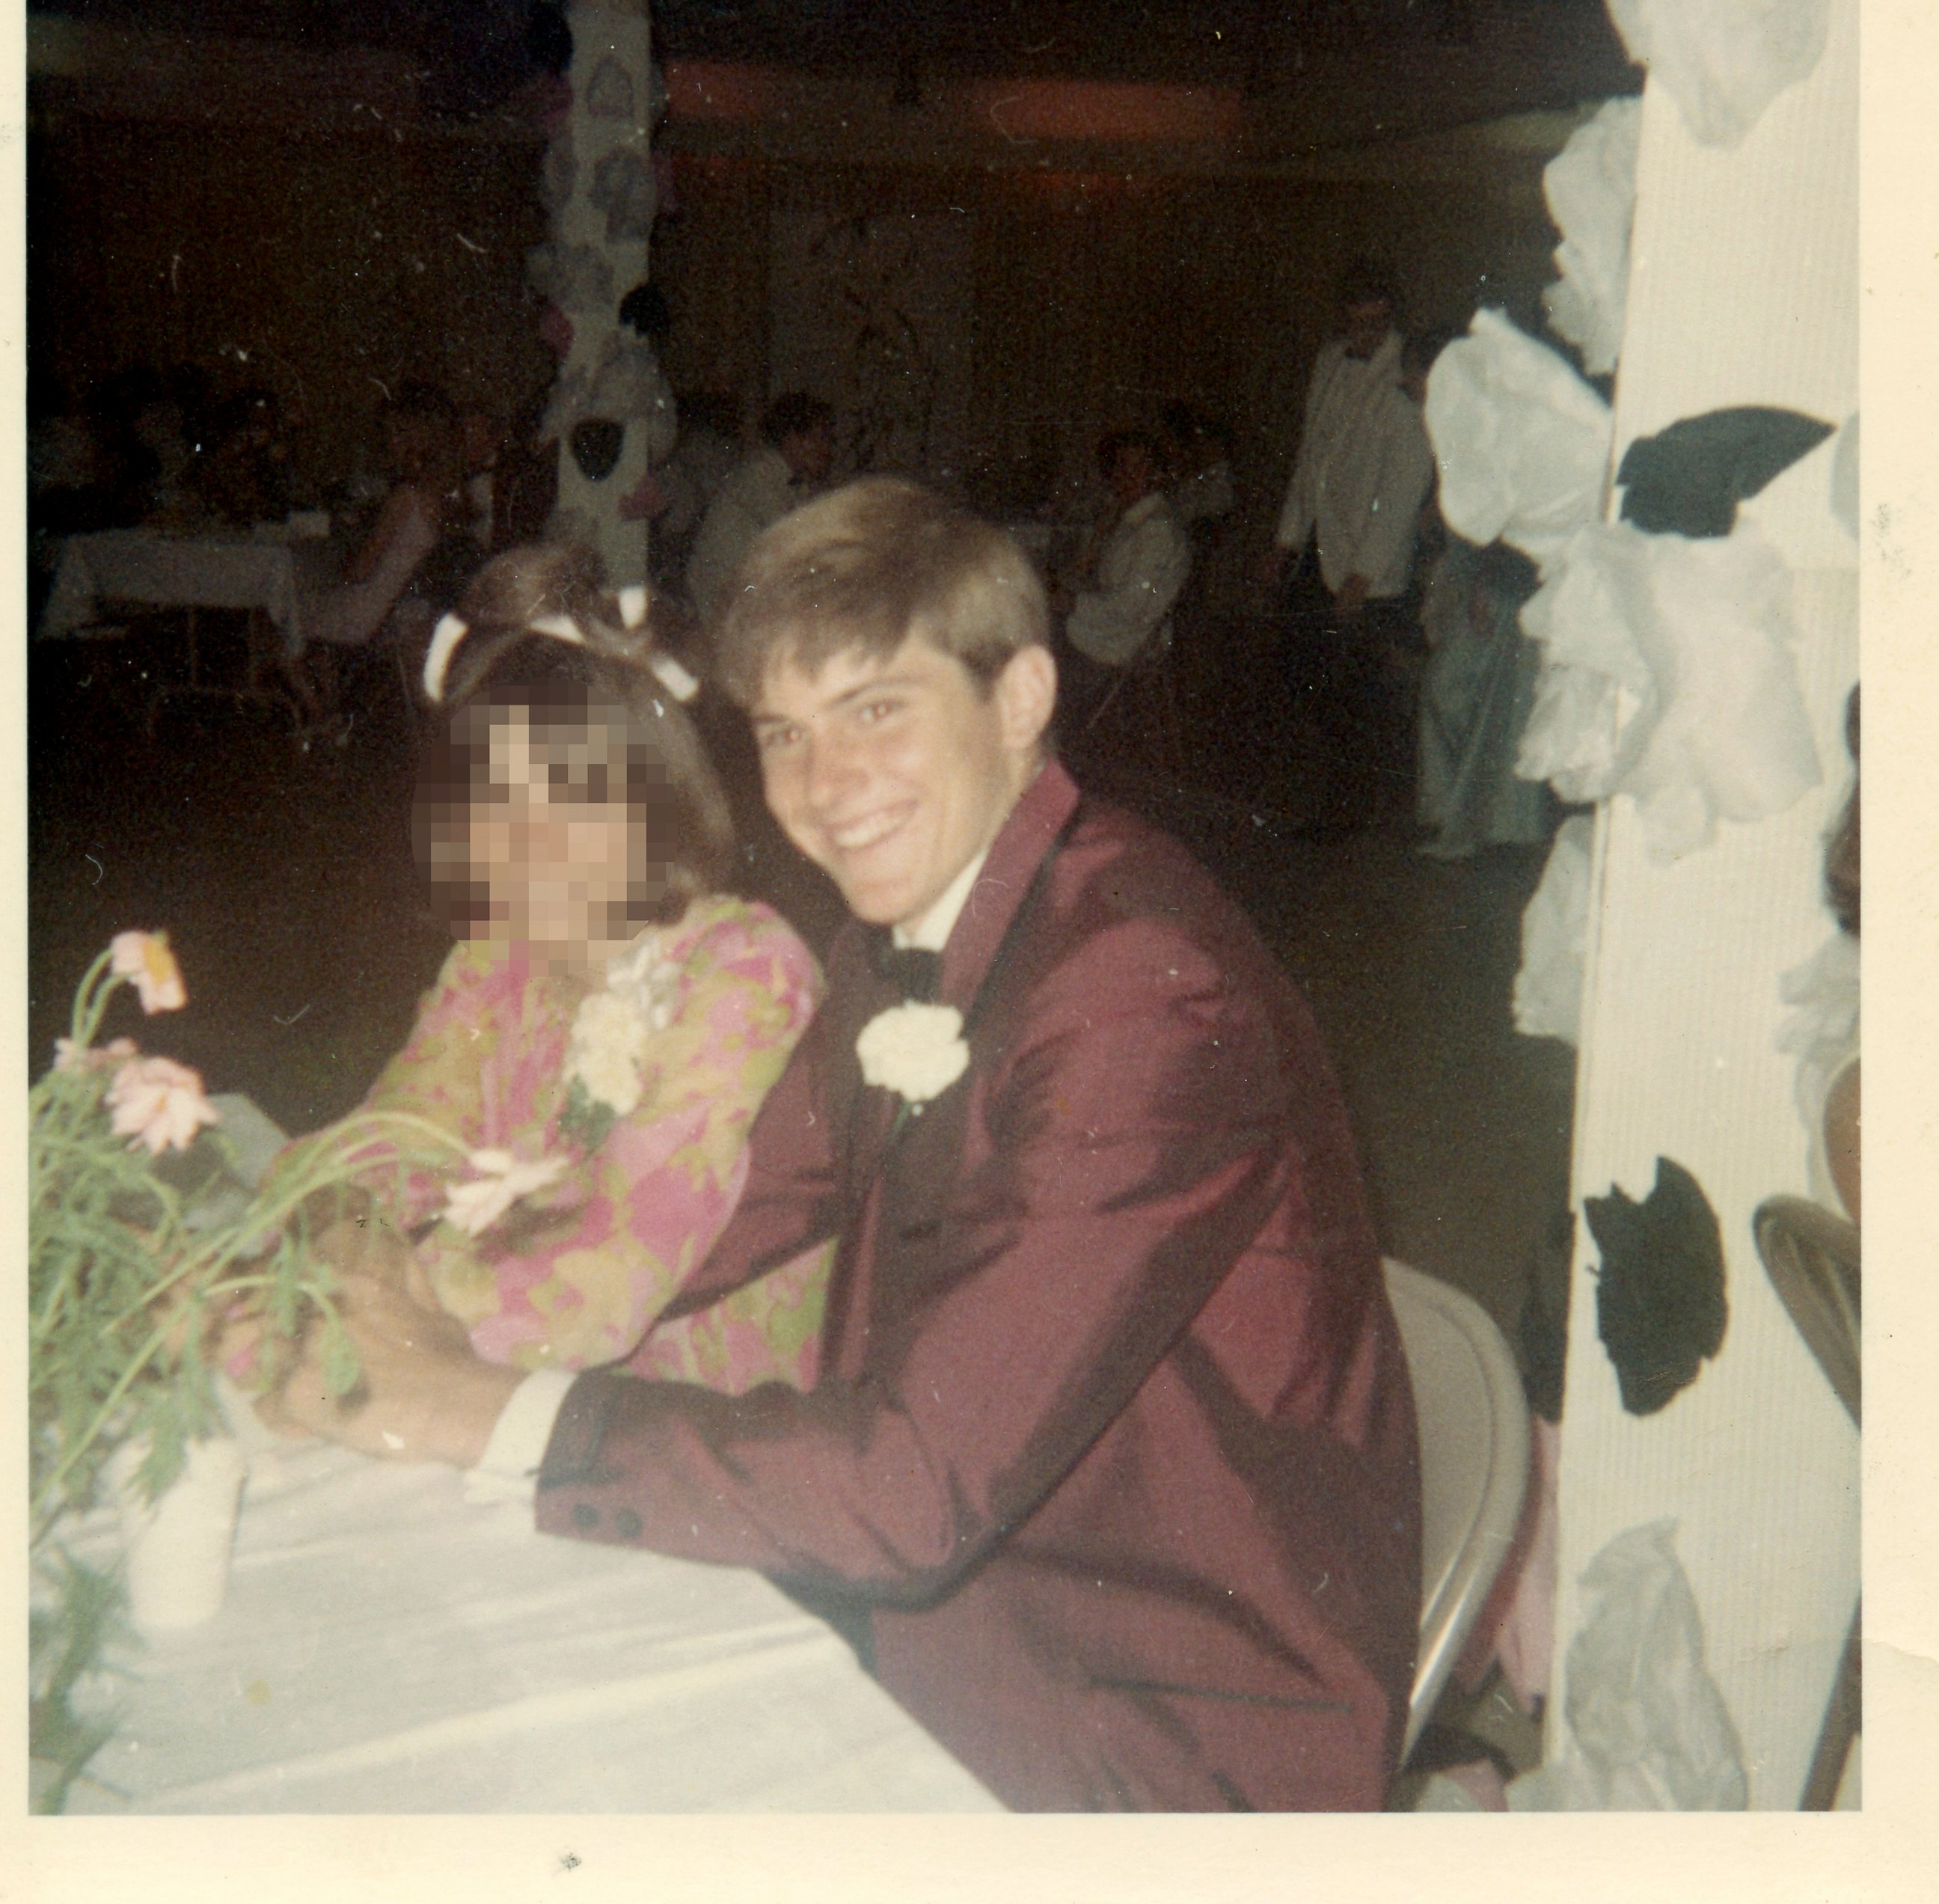 PHOTO: Bruce Jenner is shown here at a high school dance in this undated childhood family photo.